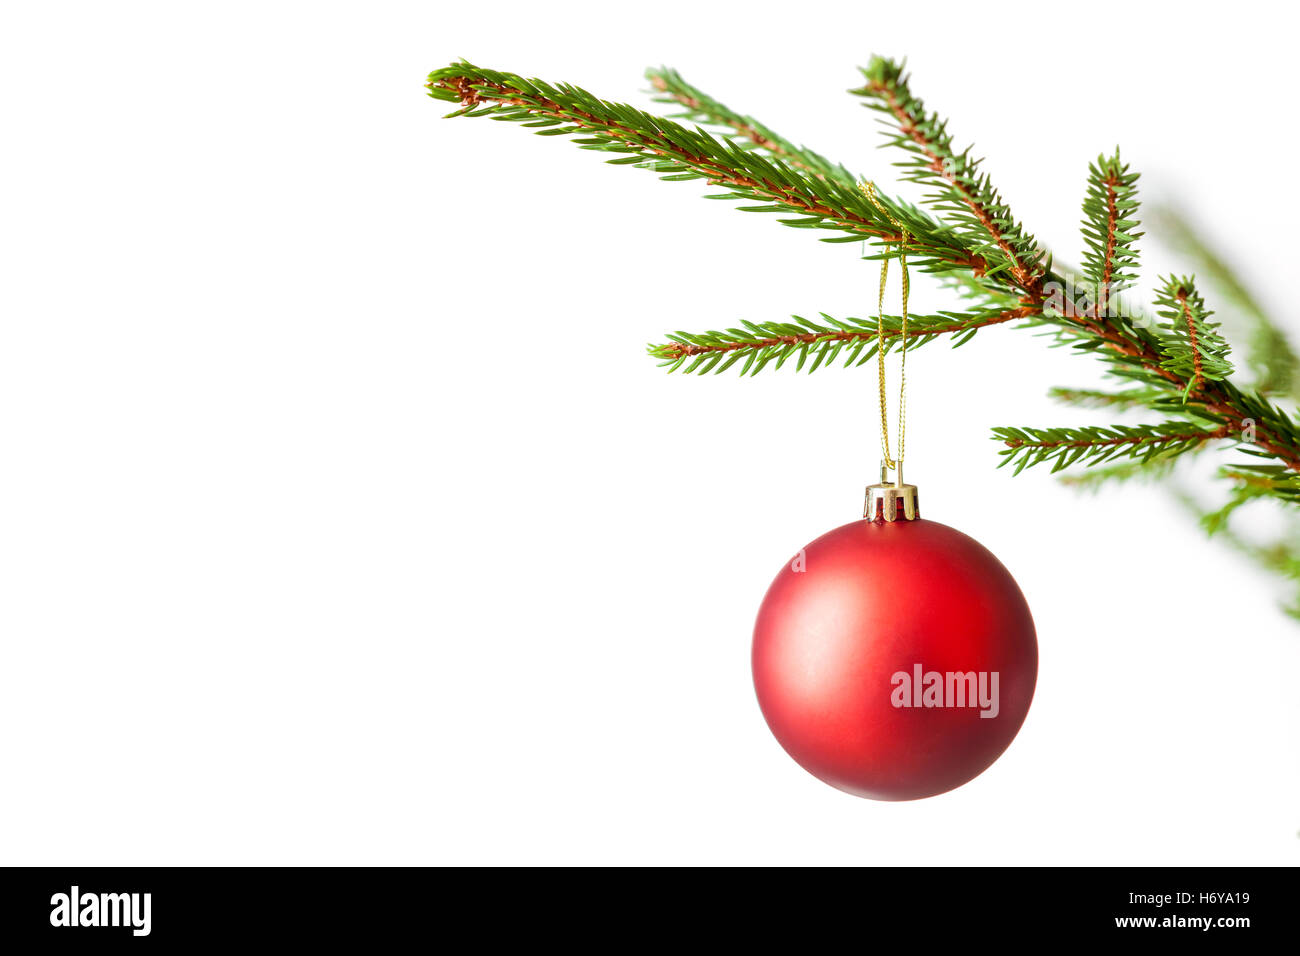 Decoration bauble on decorated Christmas tree iso Stock Photo